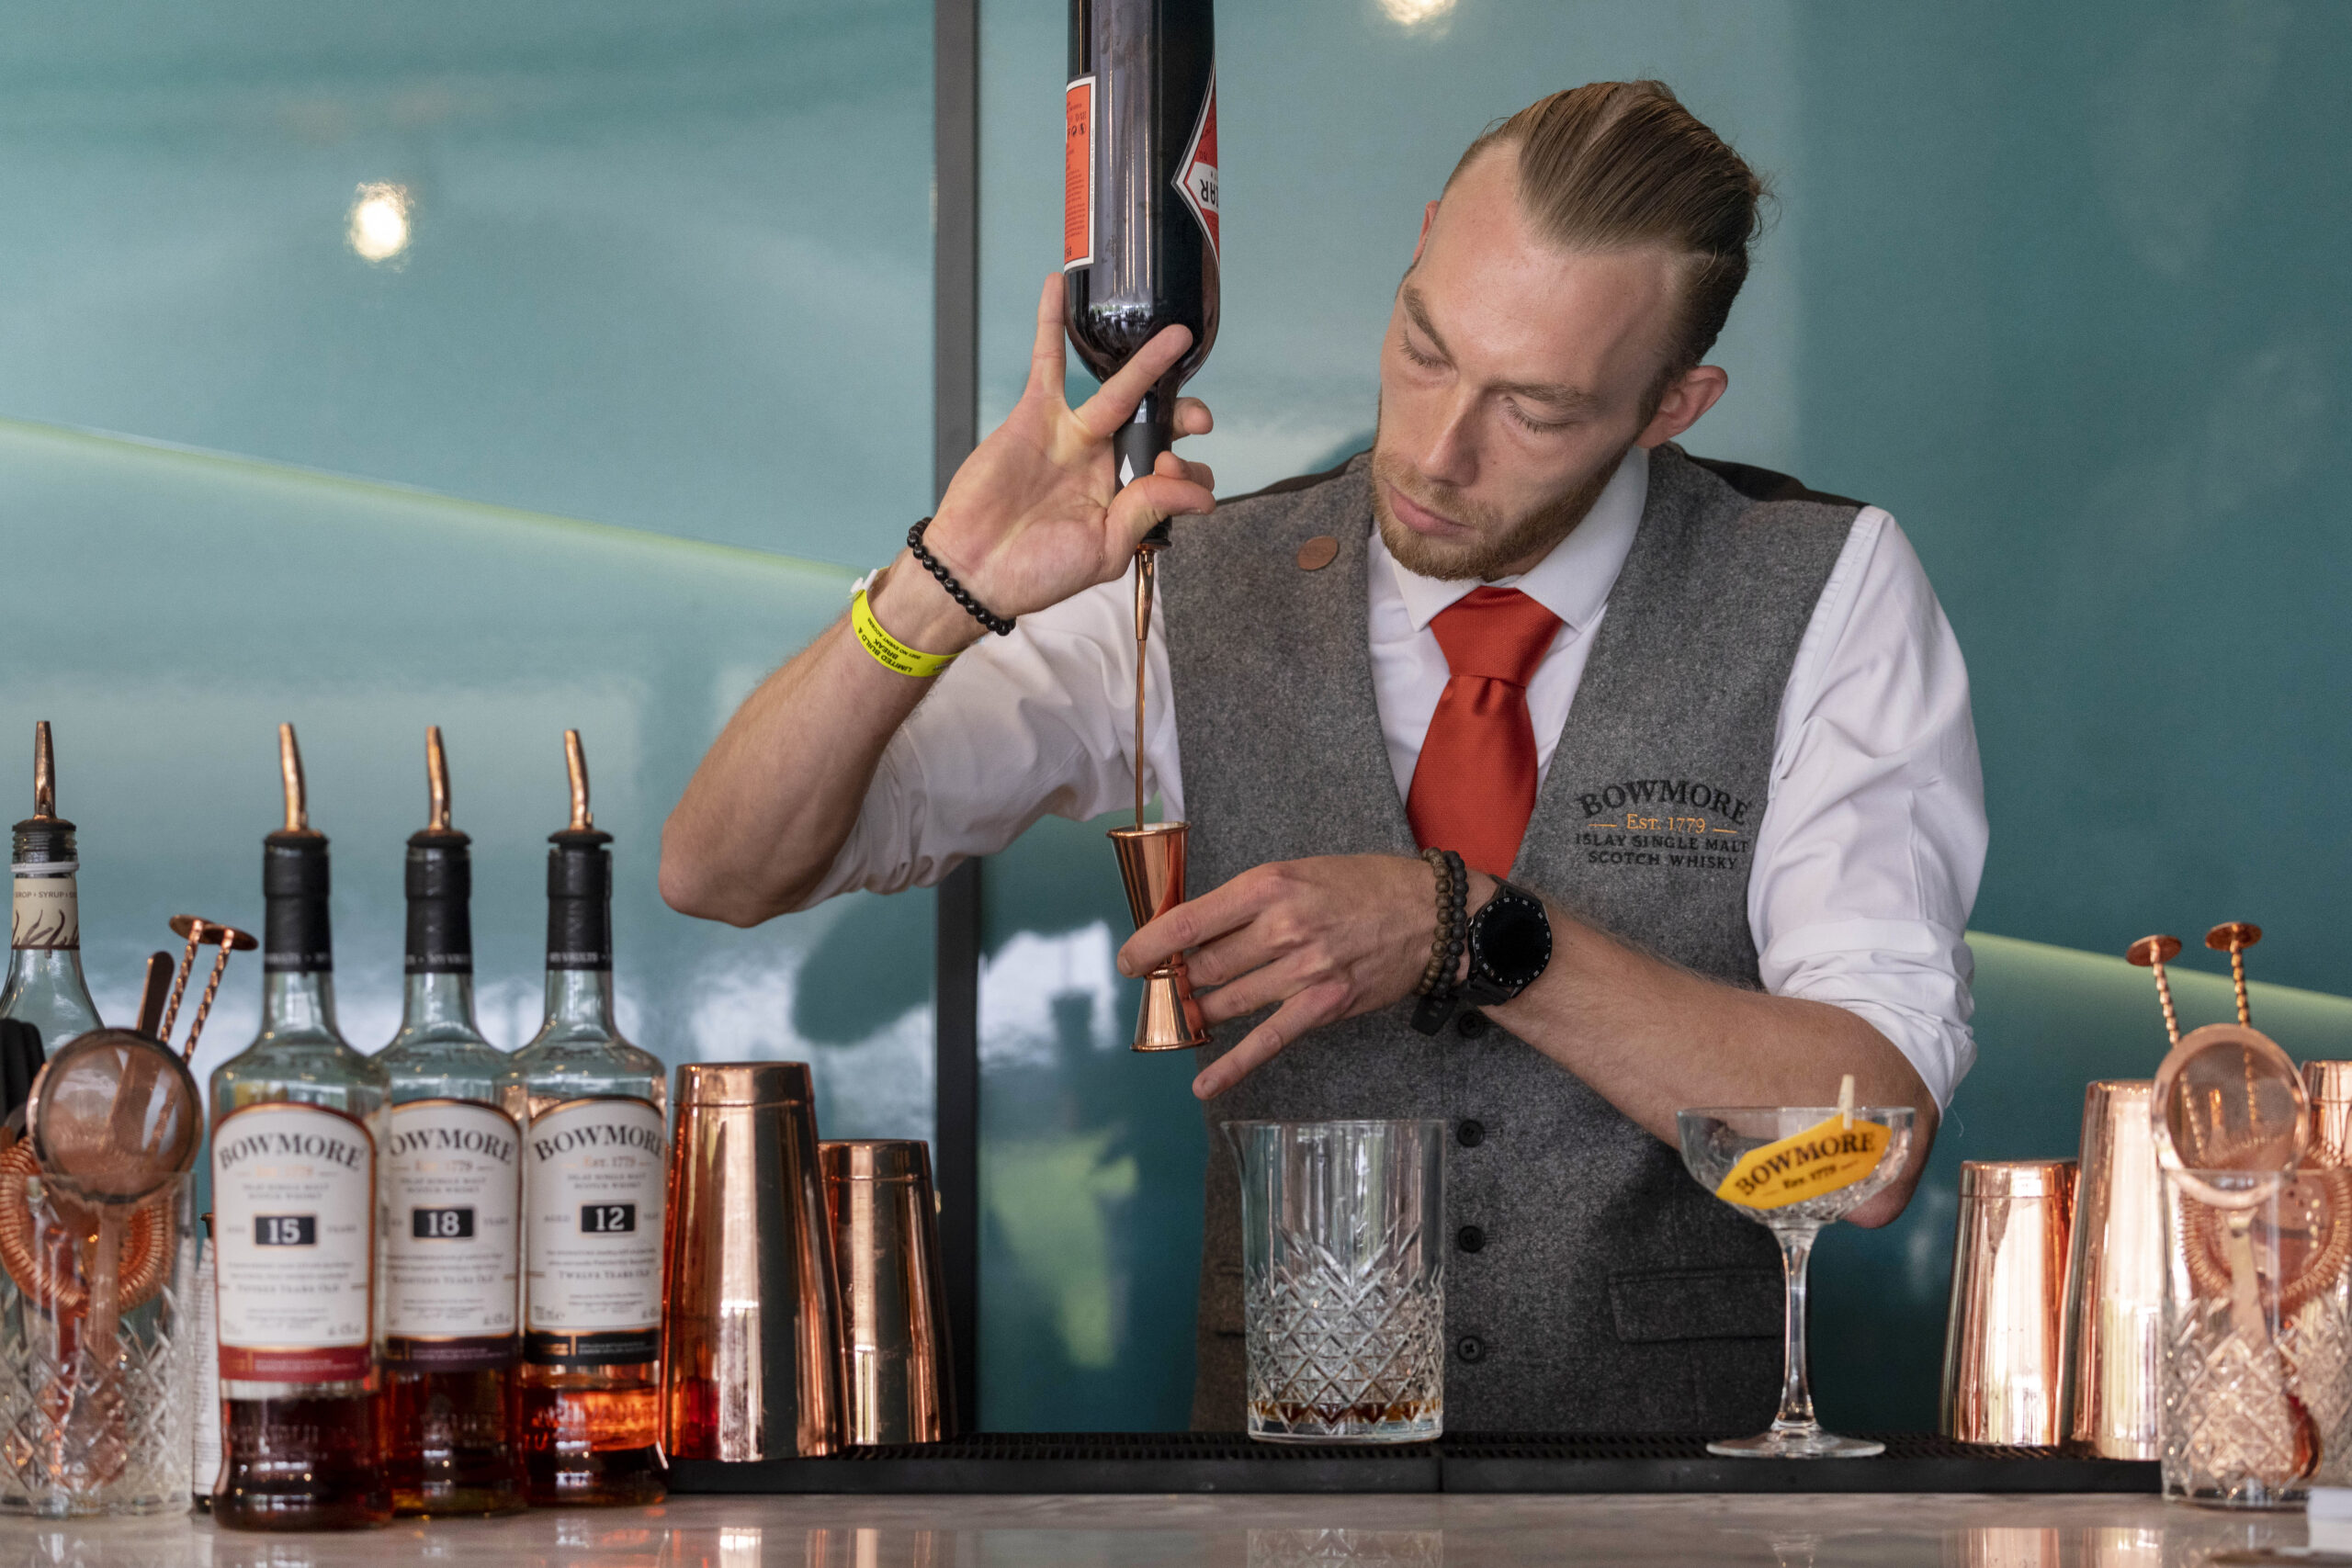 A mixologist from The Cocktail Service at an activation for Bowmore Whisky in the Aston Martin marquee at Goodwood Festival 2021